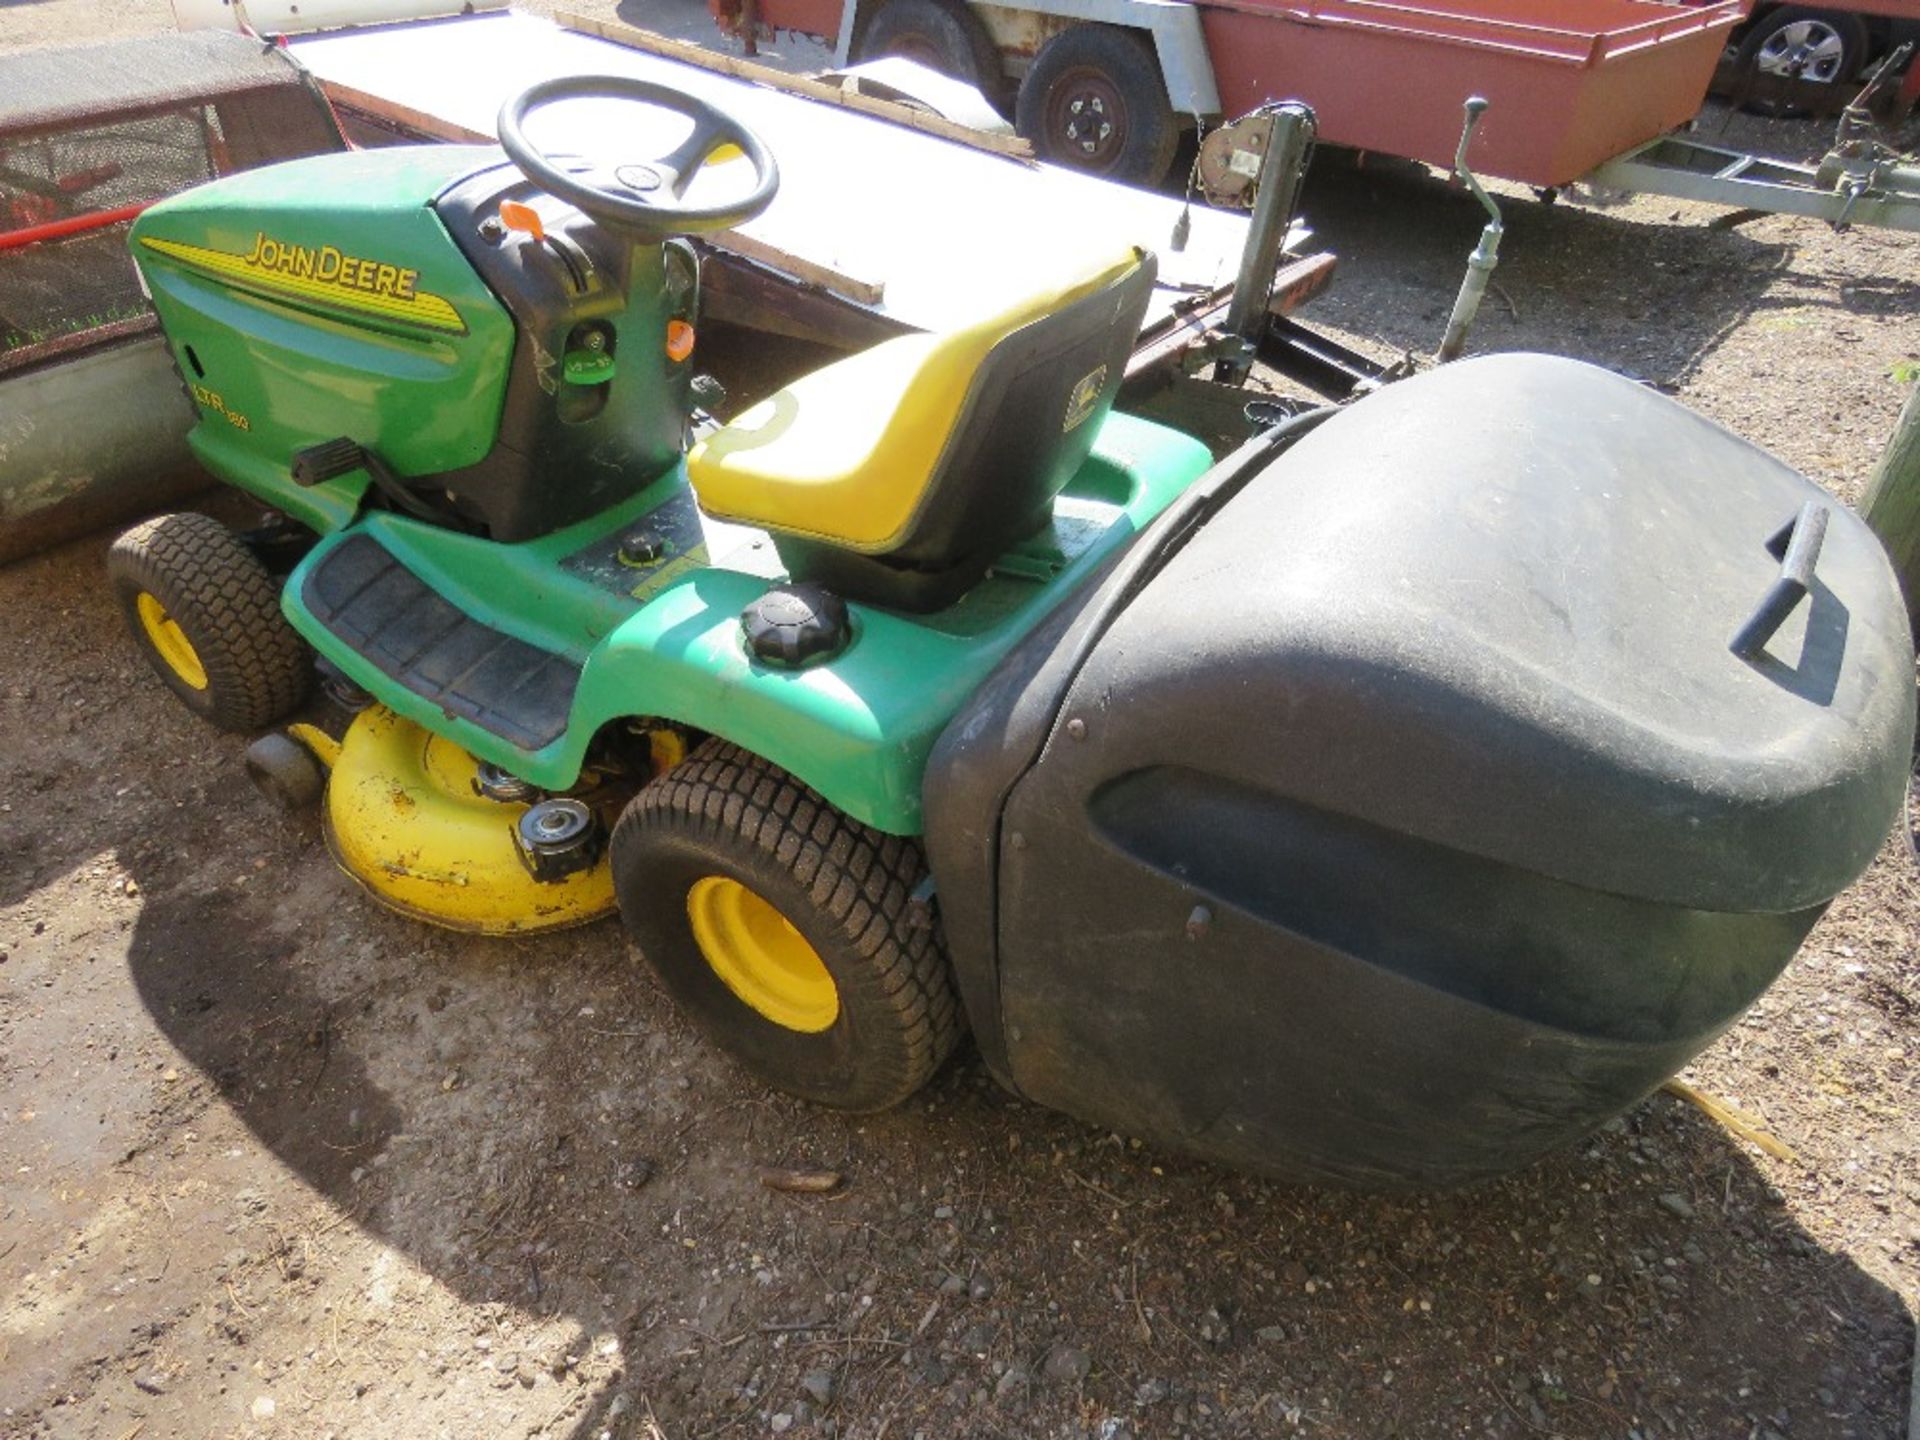 JOHN DEERE LTR180 PETROL ENGINED RIDE ON MOWER WITH COLLECTOR. WHEN TESTED WAS SEEN TO START, DRIVE, - Image 4 of 10